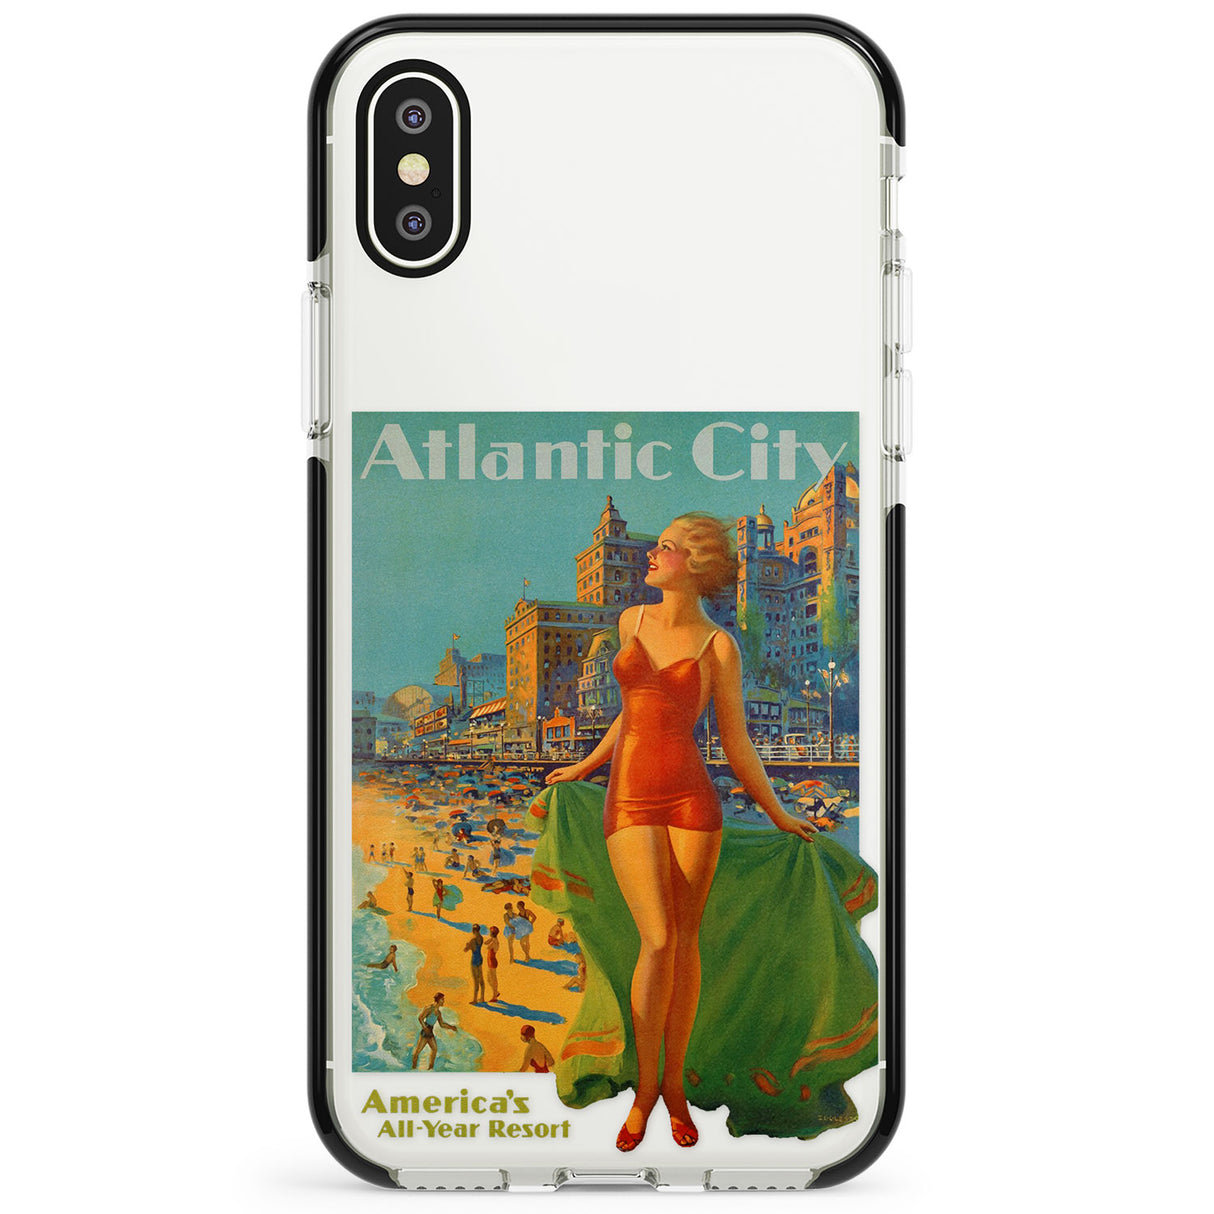 Atlantic City Vacation Poster Phone Case for iPhone X XS Max XR